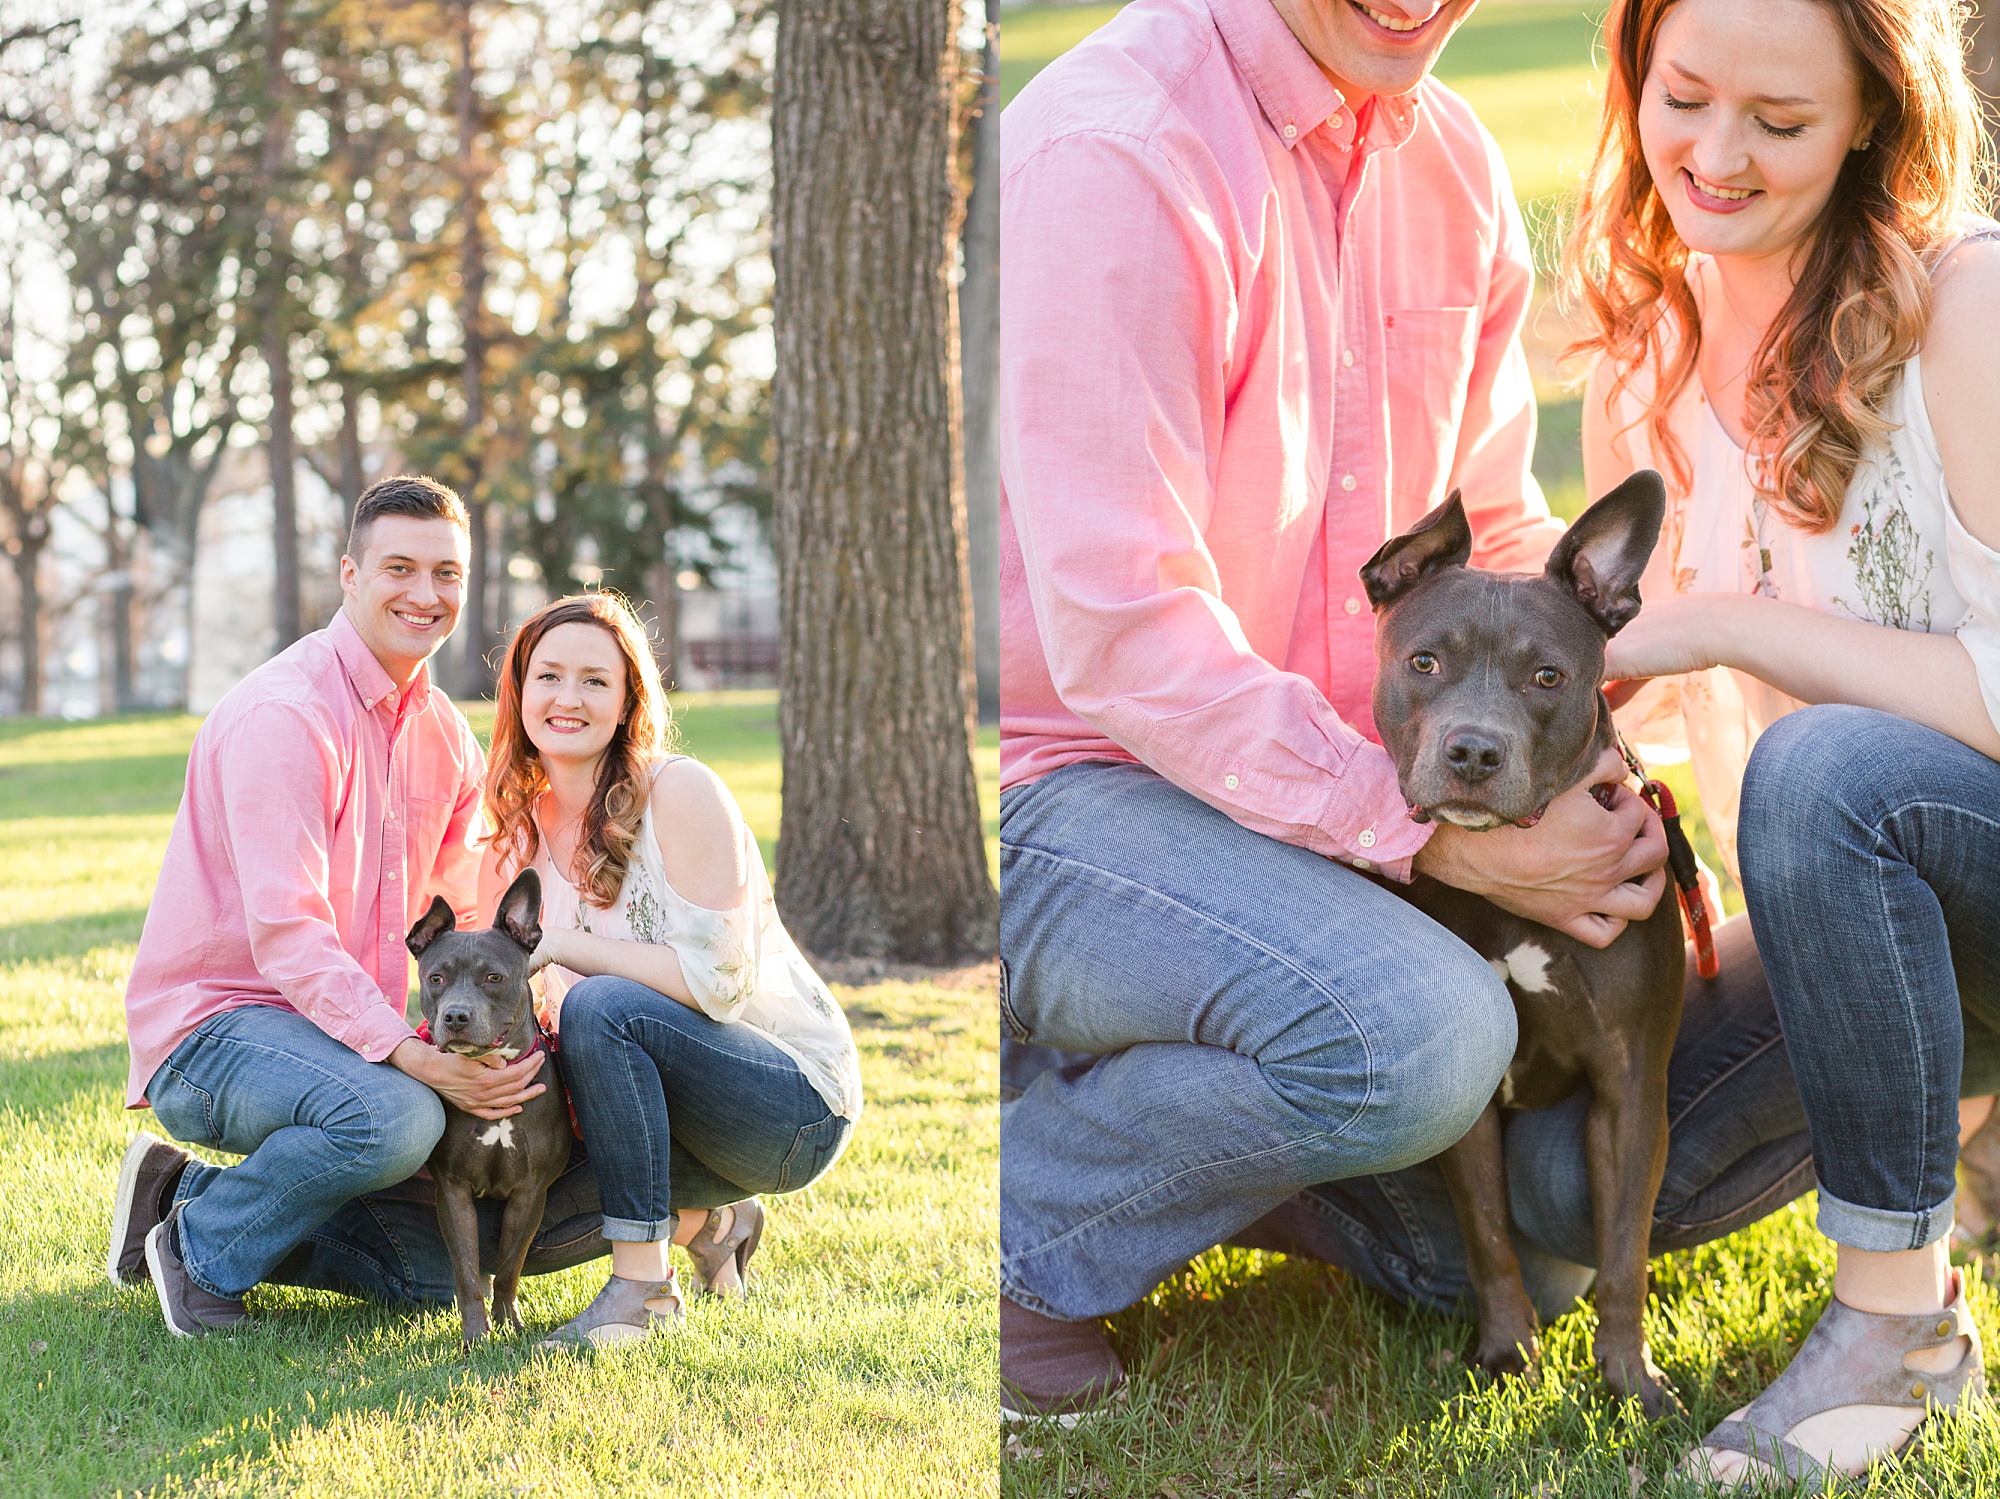 An engaged couple smile with their young pit bull puppy